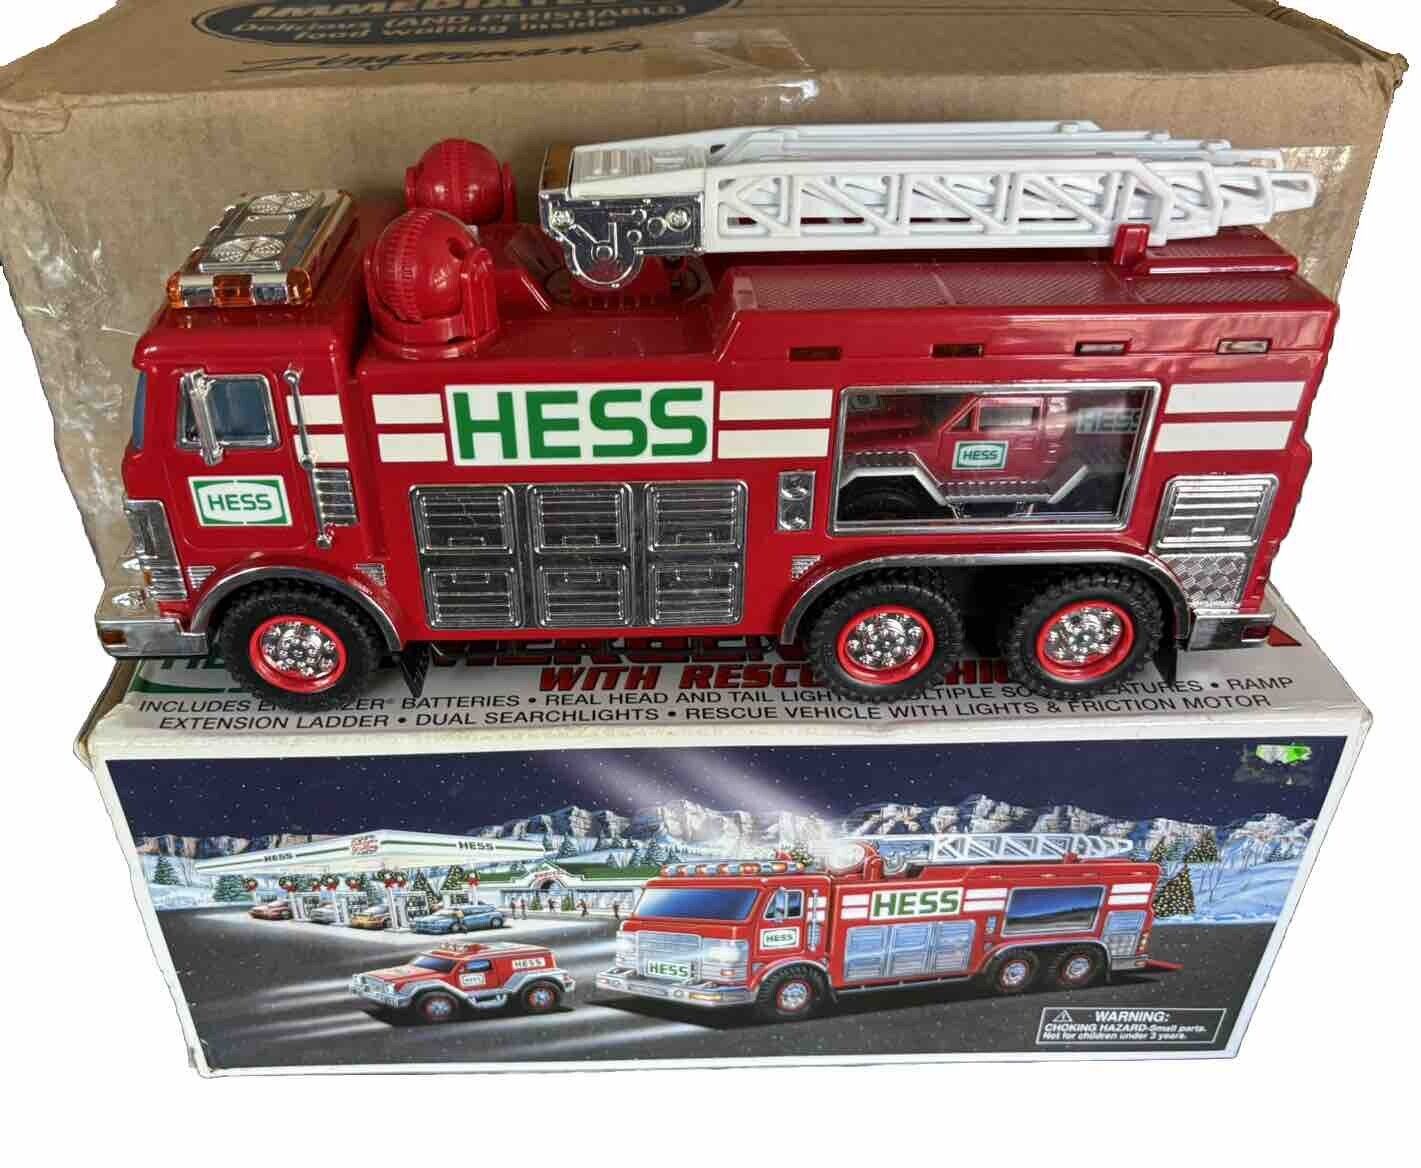 2005 Hess Toy Emergency Fire Truck with Rescue Vehicle Inside New In Box MINT